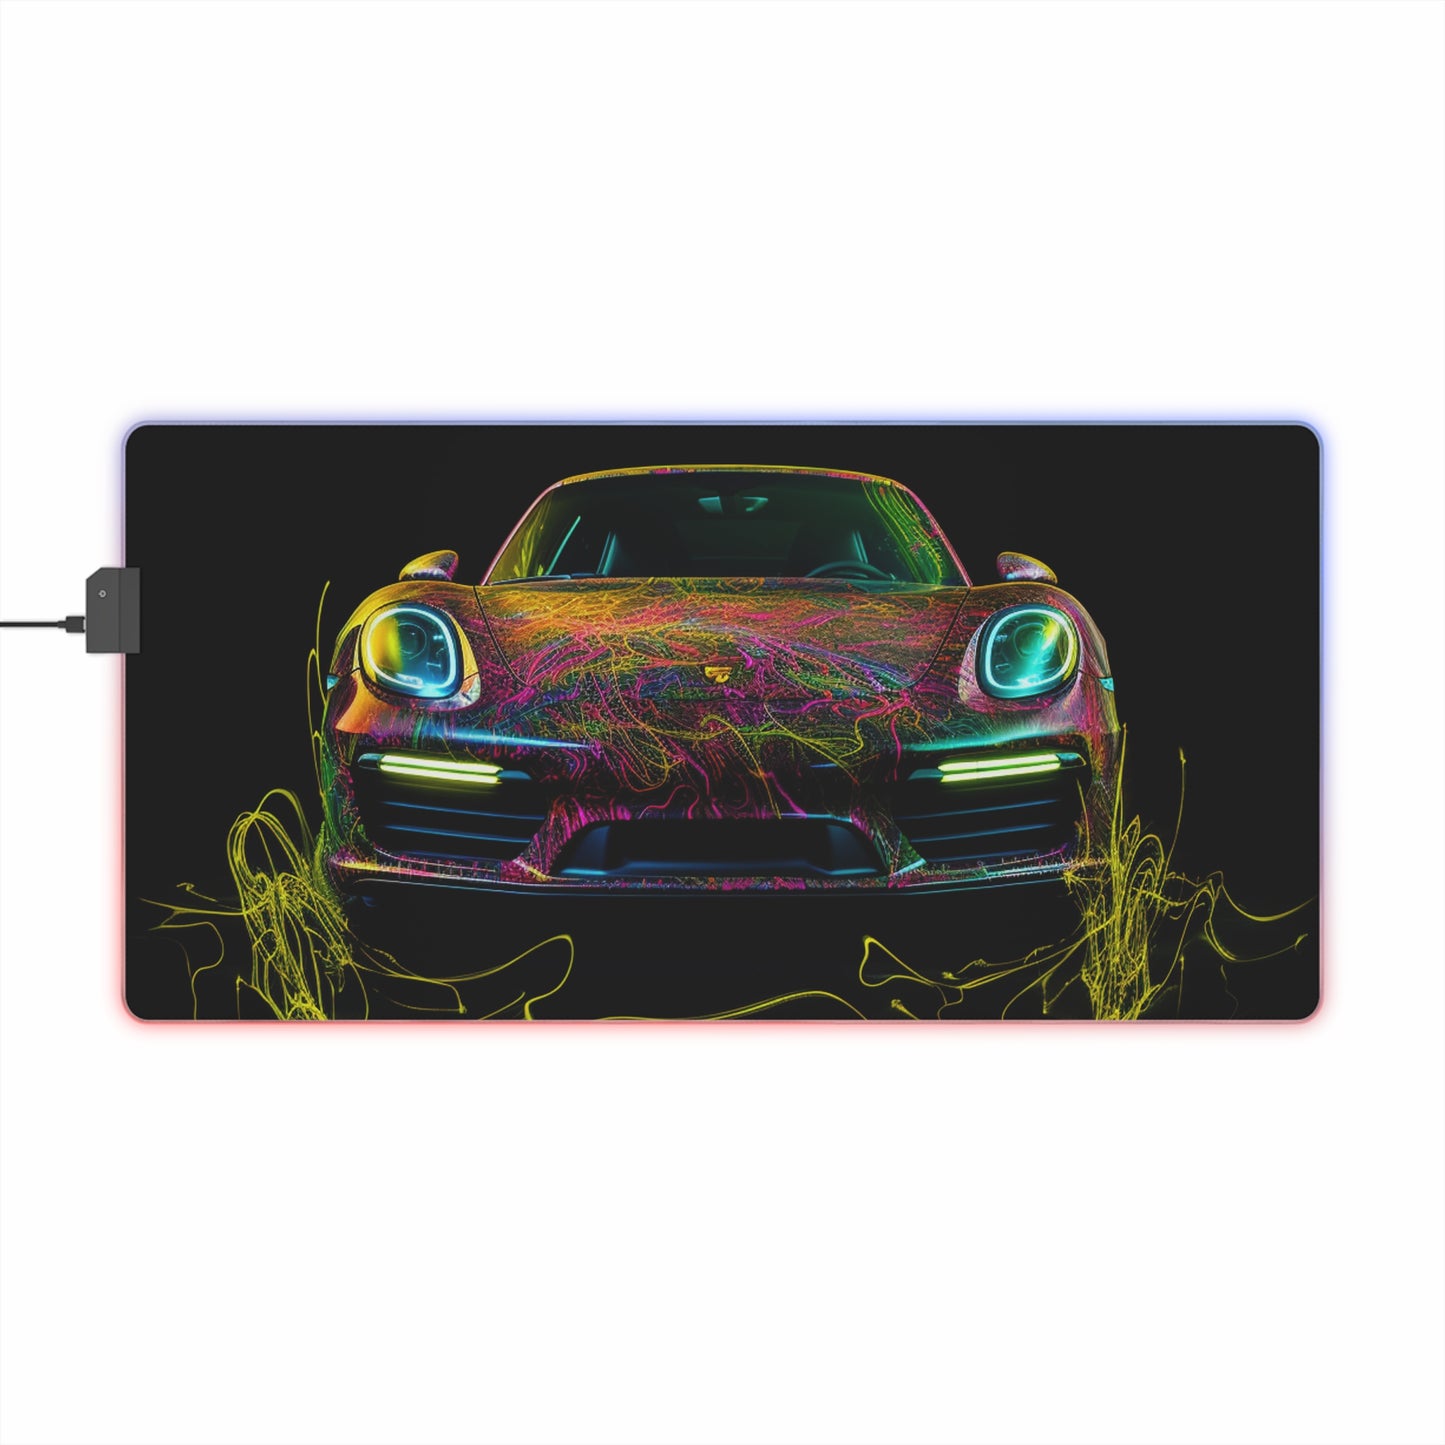 LED Gaming Mouse Pad Porsche Flair 2